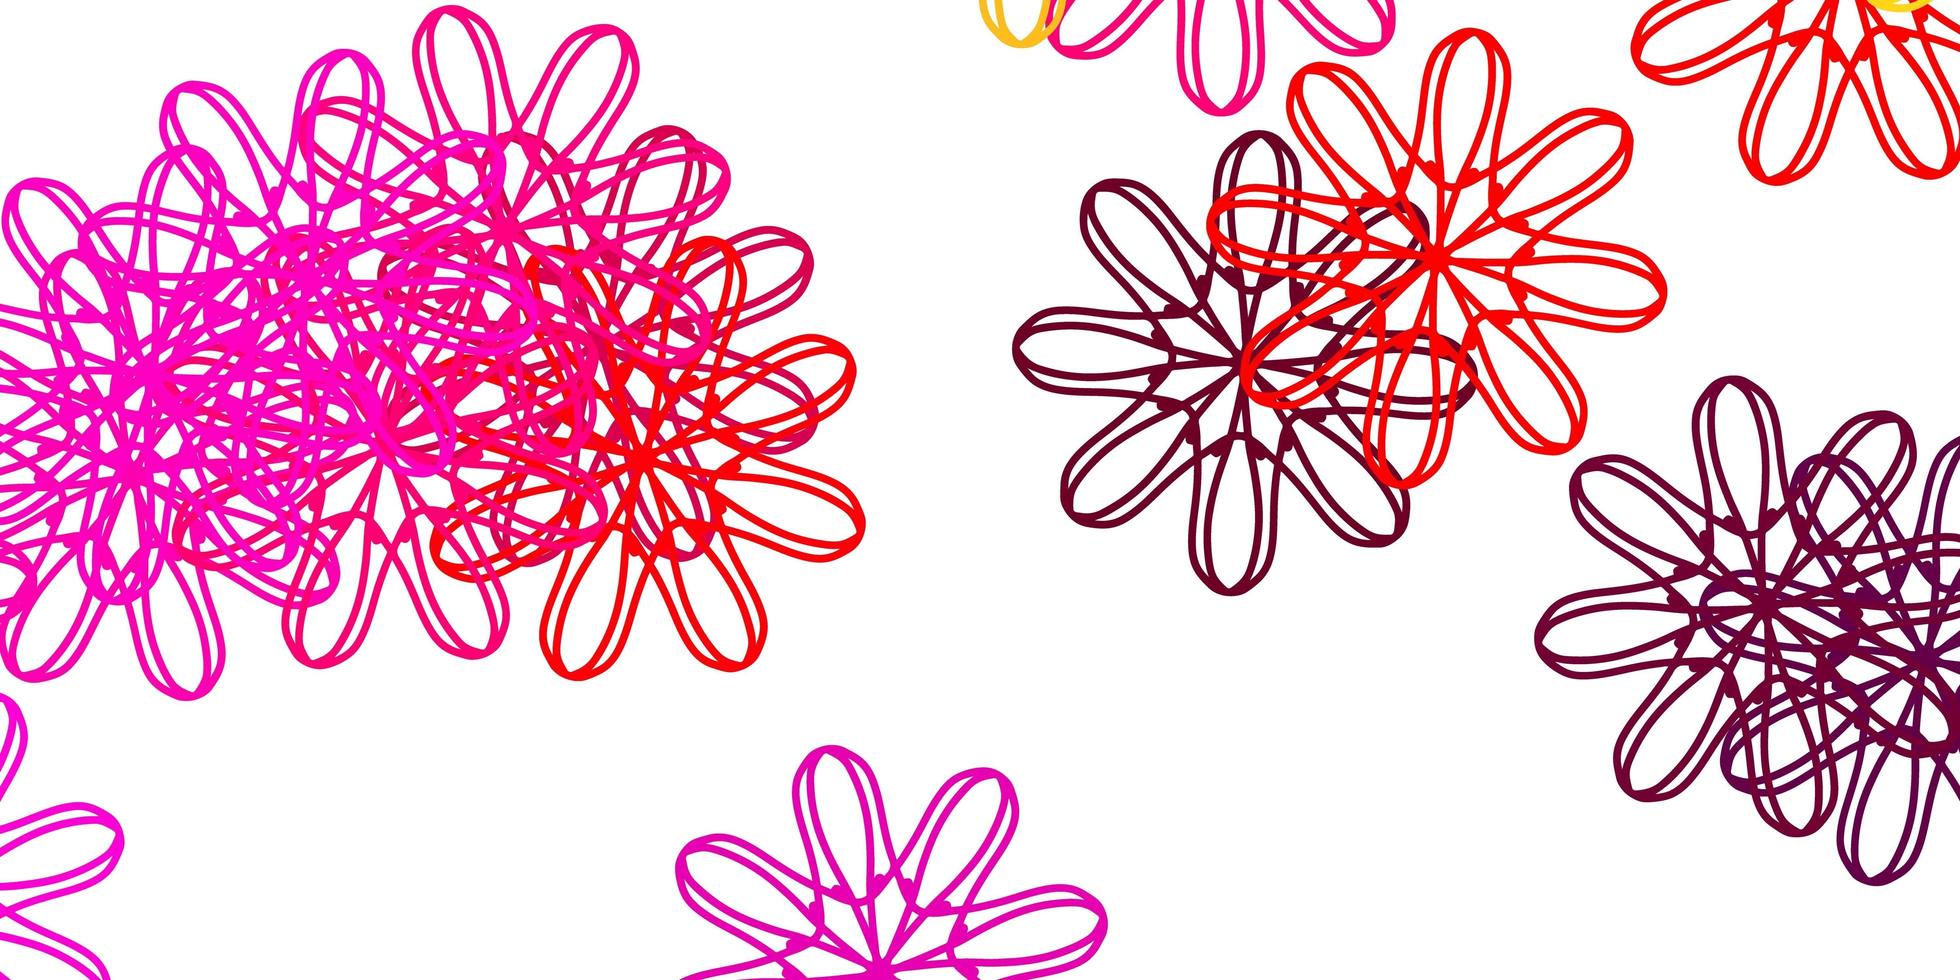 Light Pink, Yellow vector doodle texture with flowers.